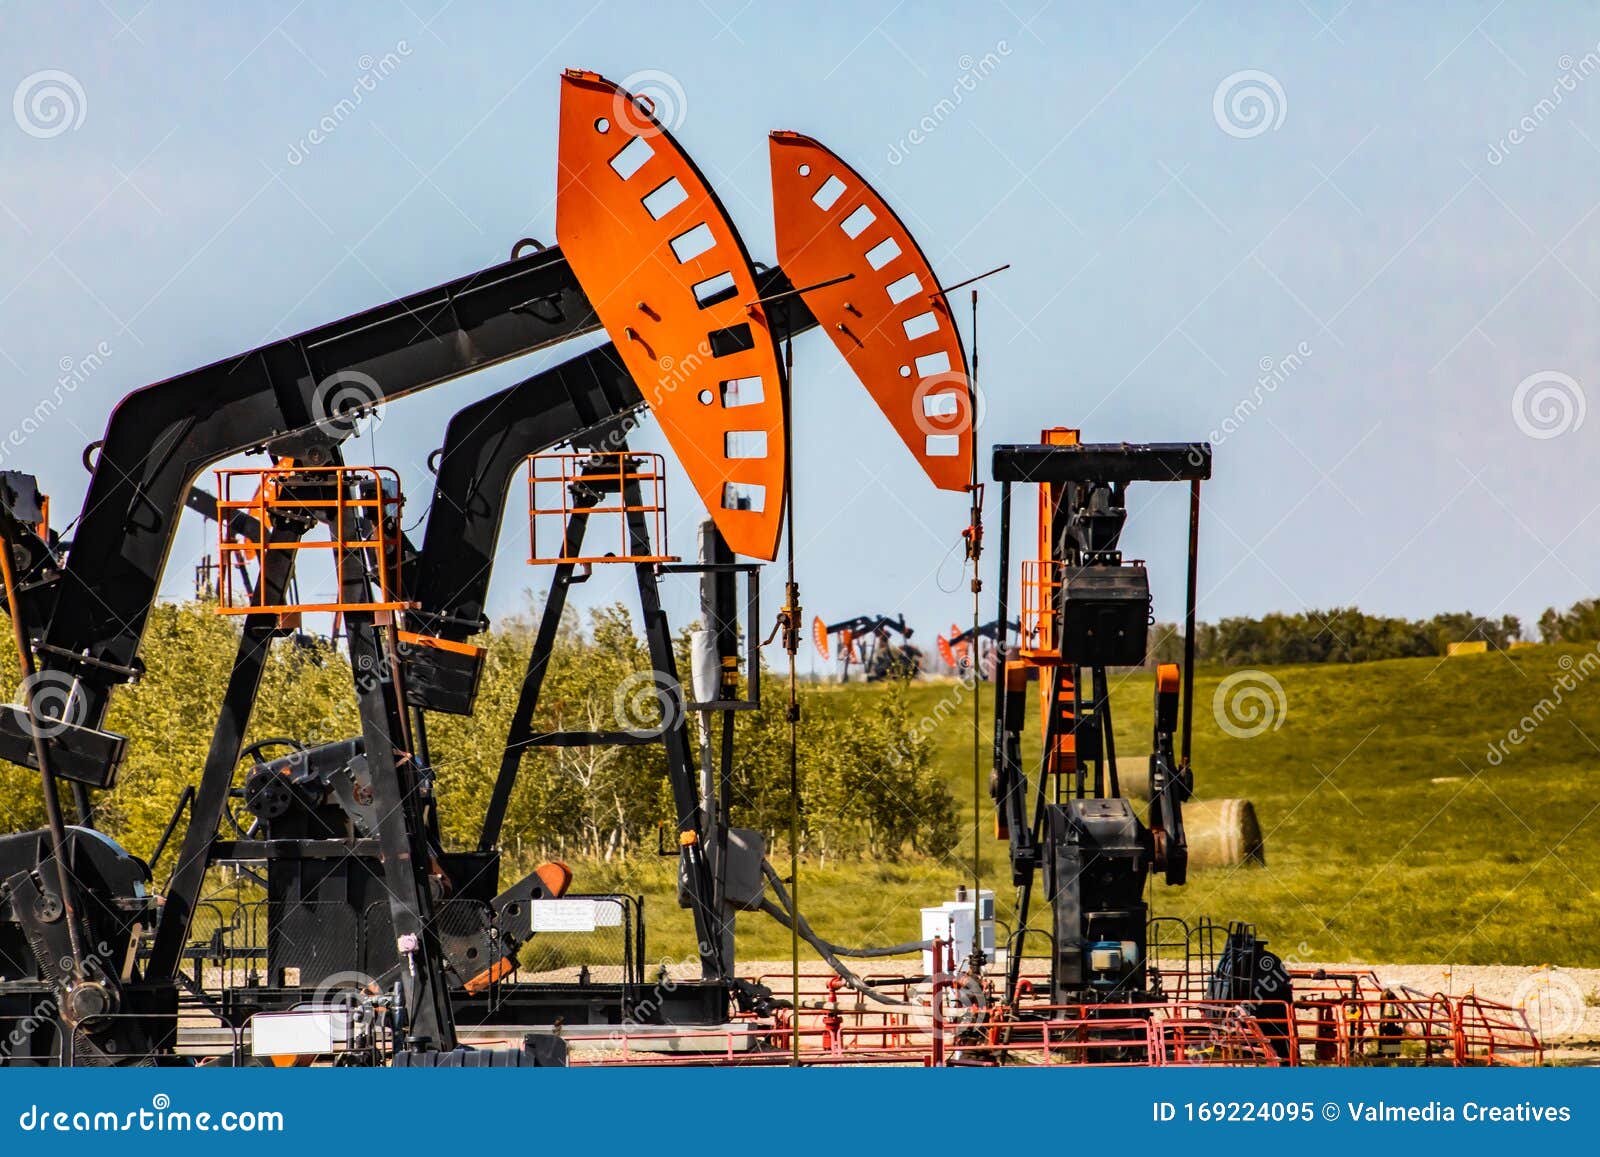 Oil Well Pumpjack in Rural Stock Image - Image of industrial, conservation: 169224095